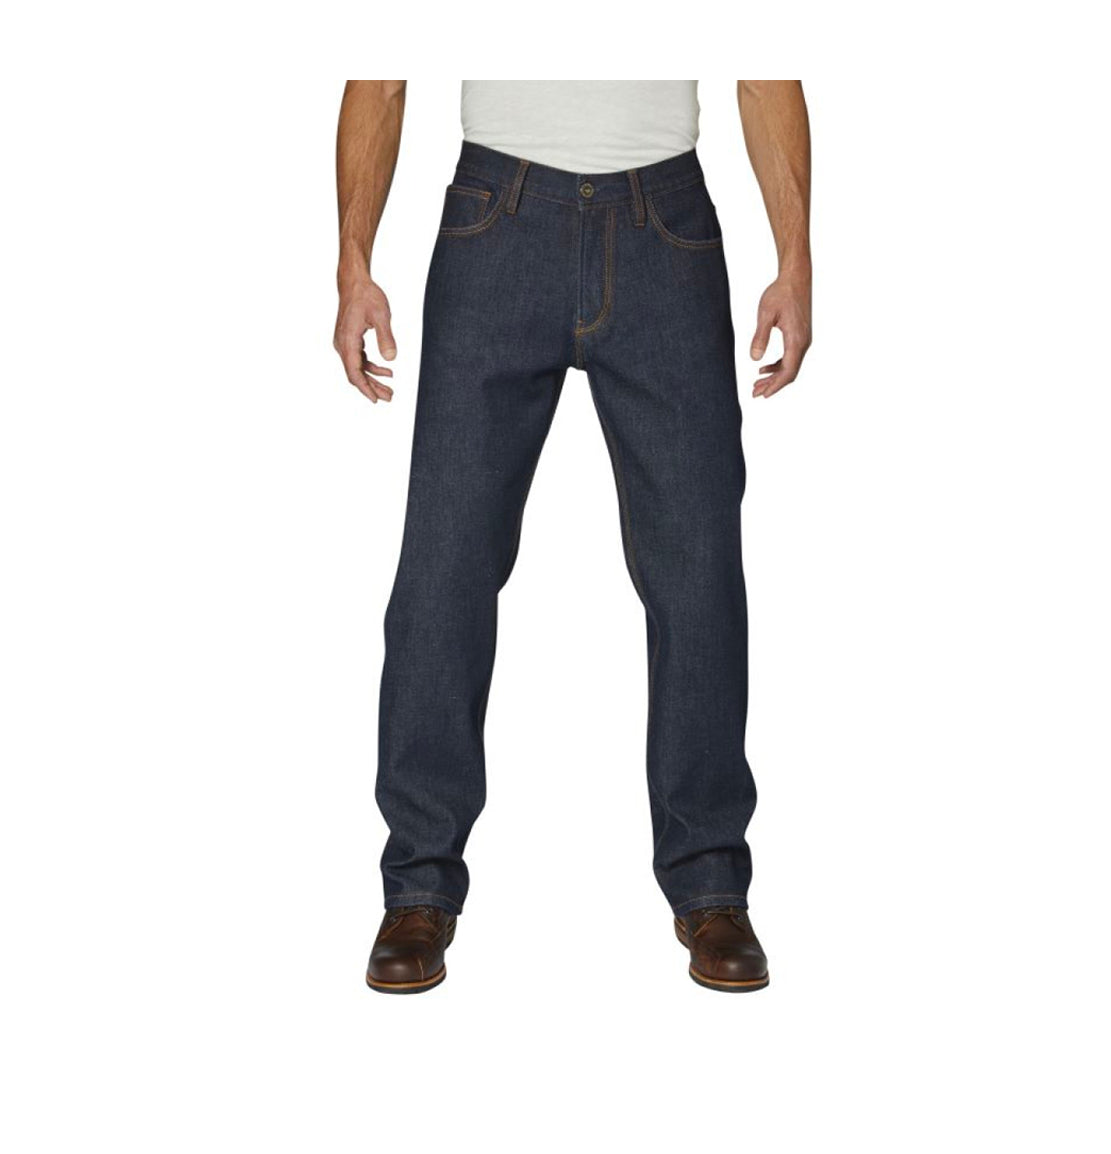 Rokker revolution AAA tapered fit